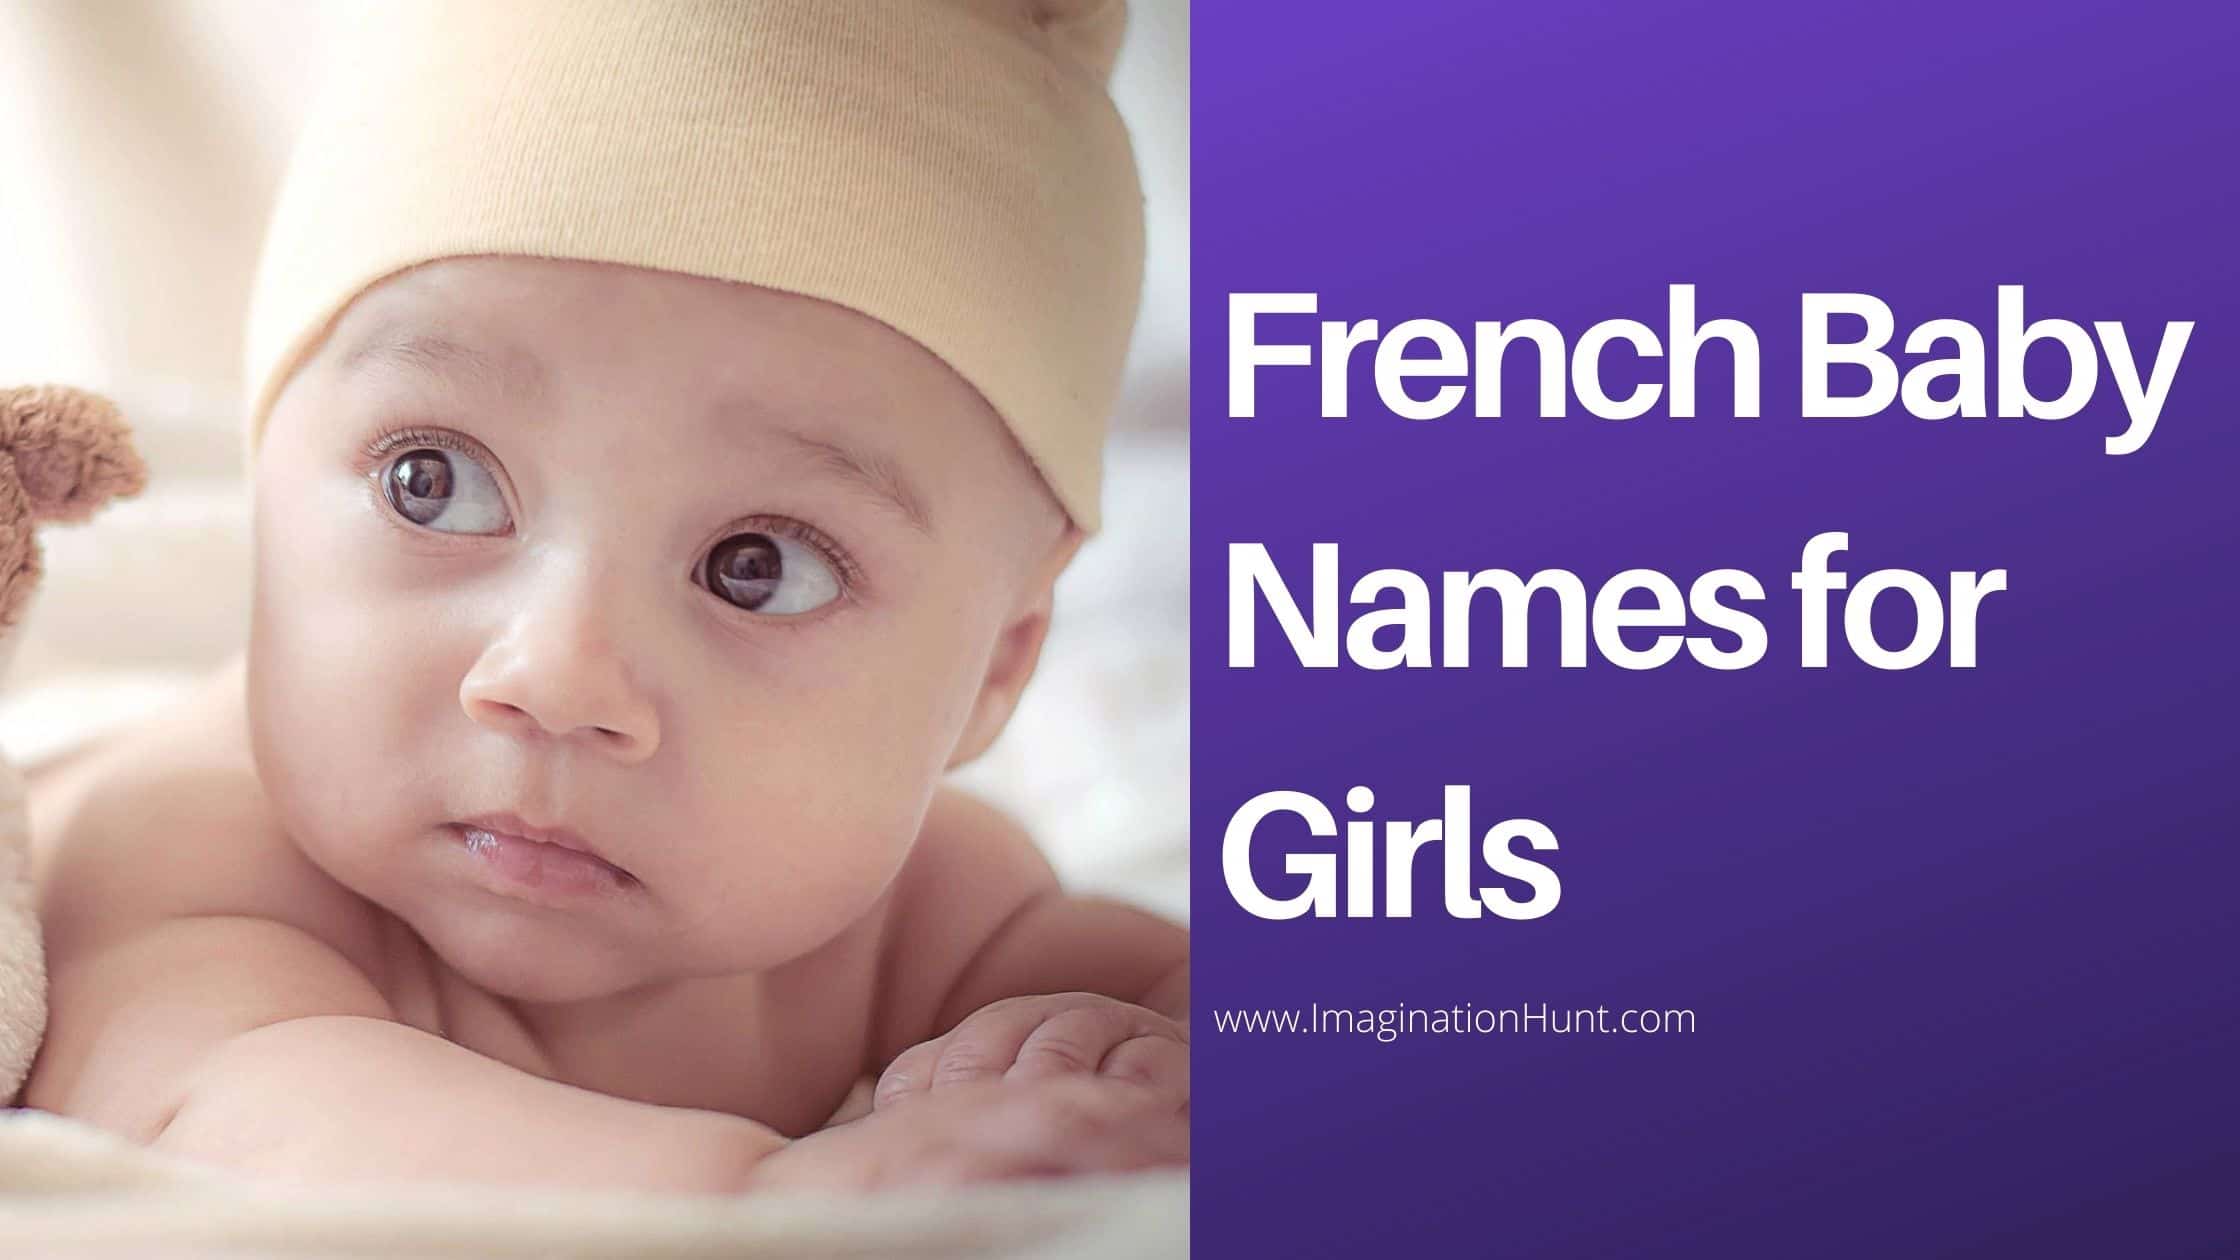 French Baby Names for Girls